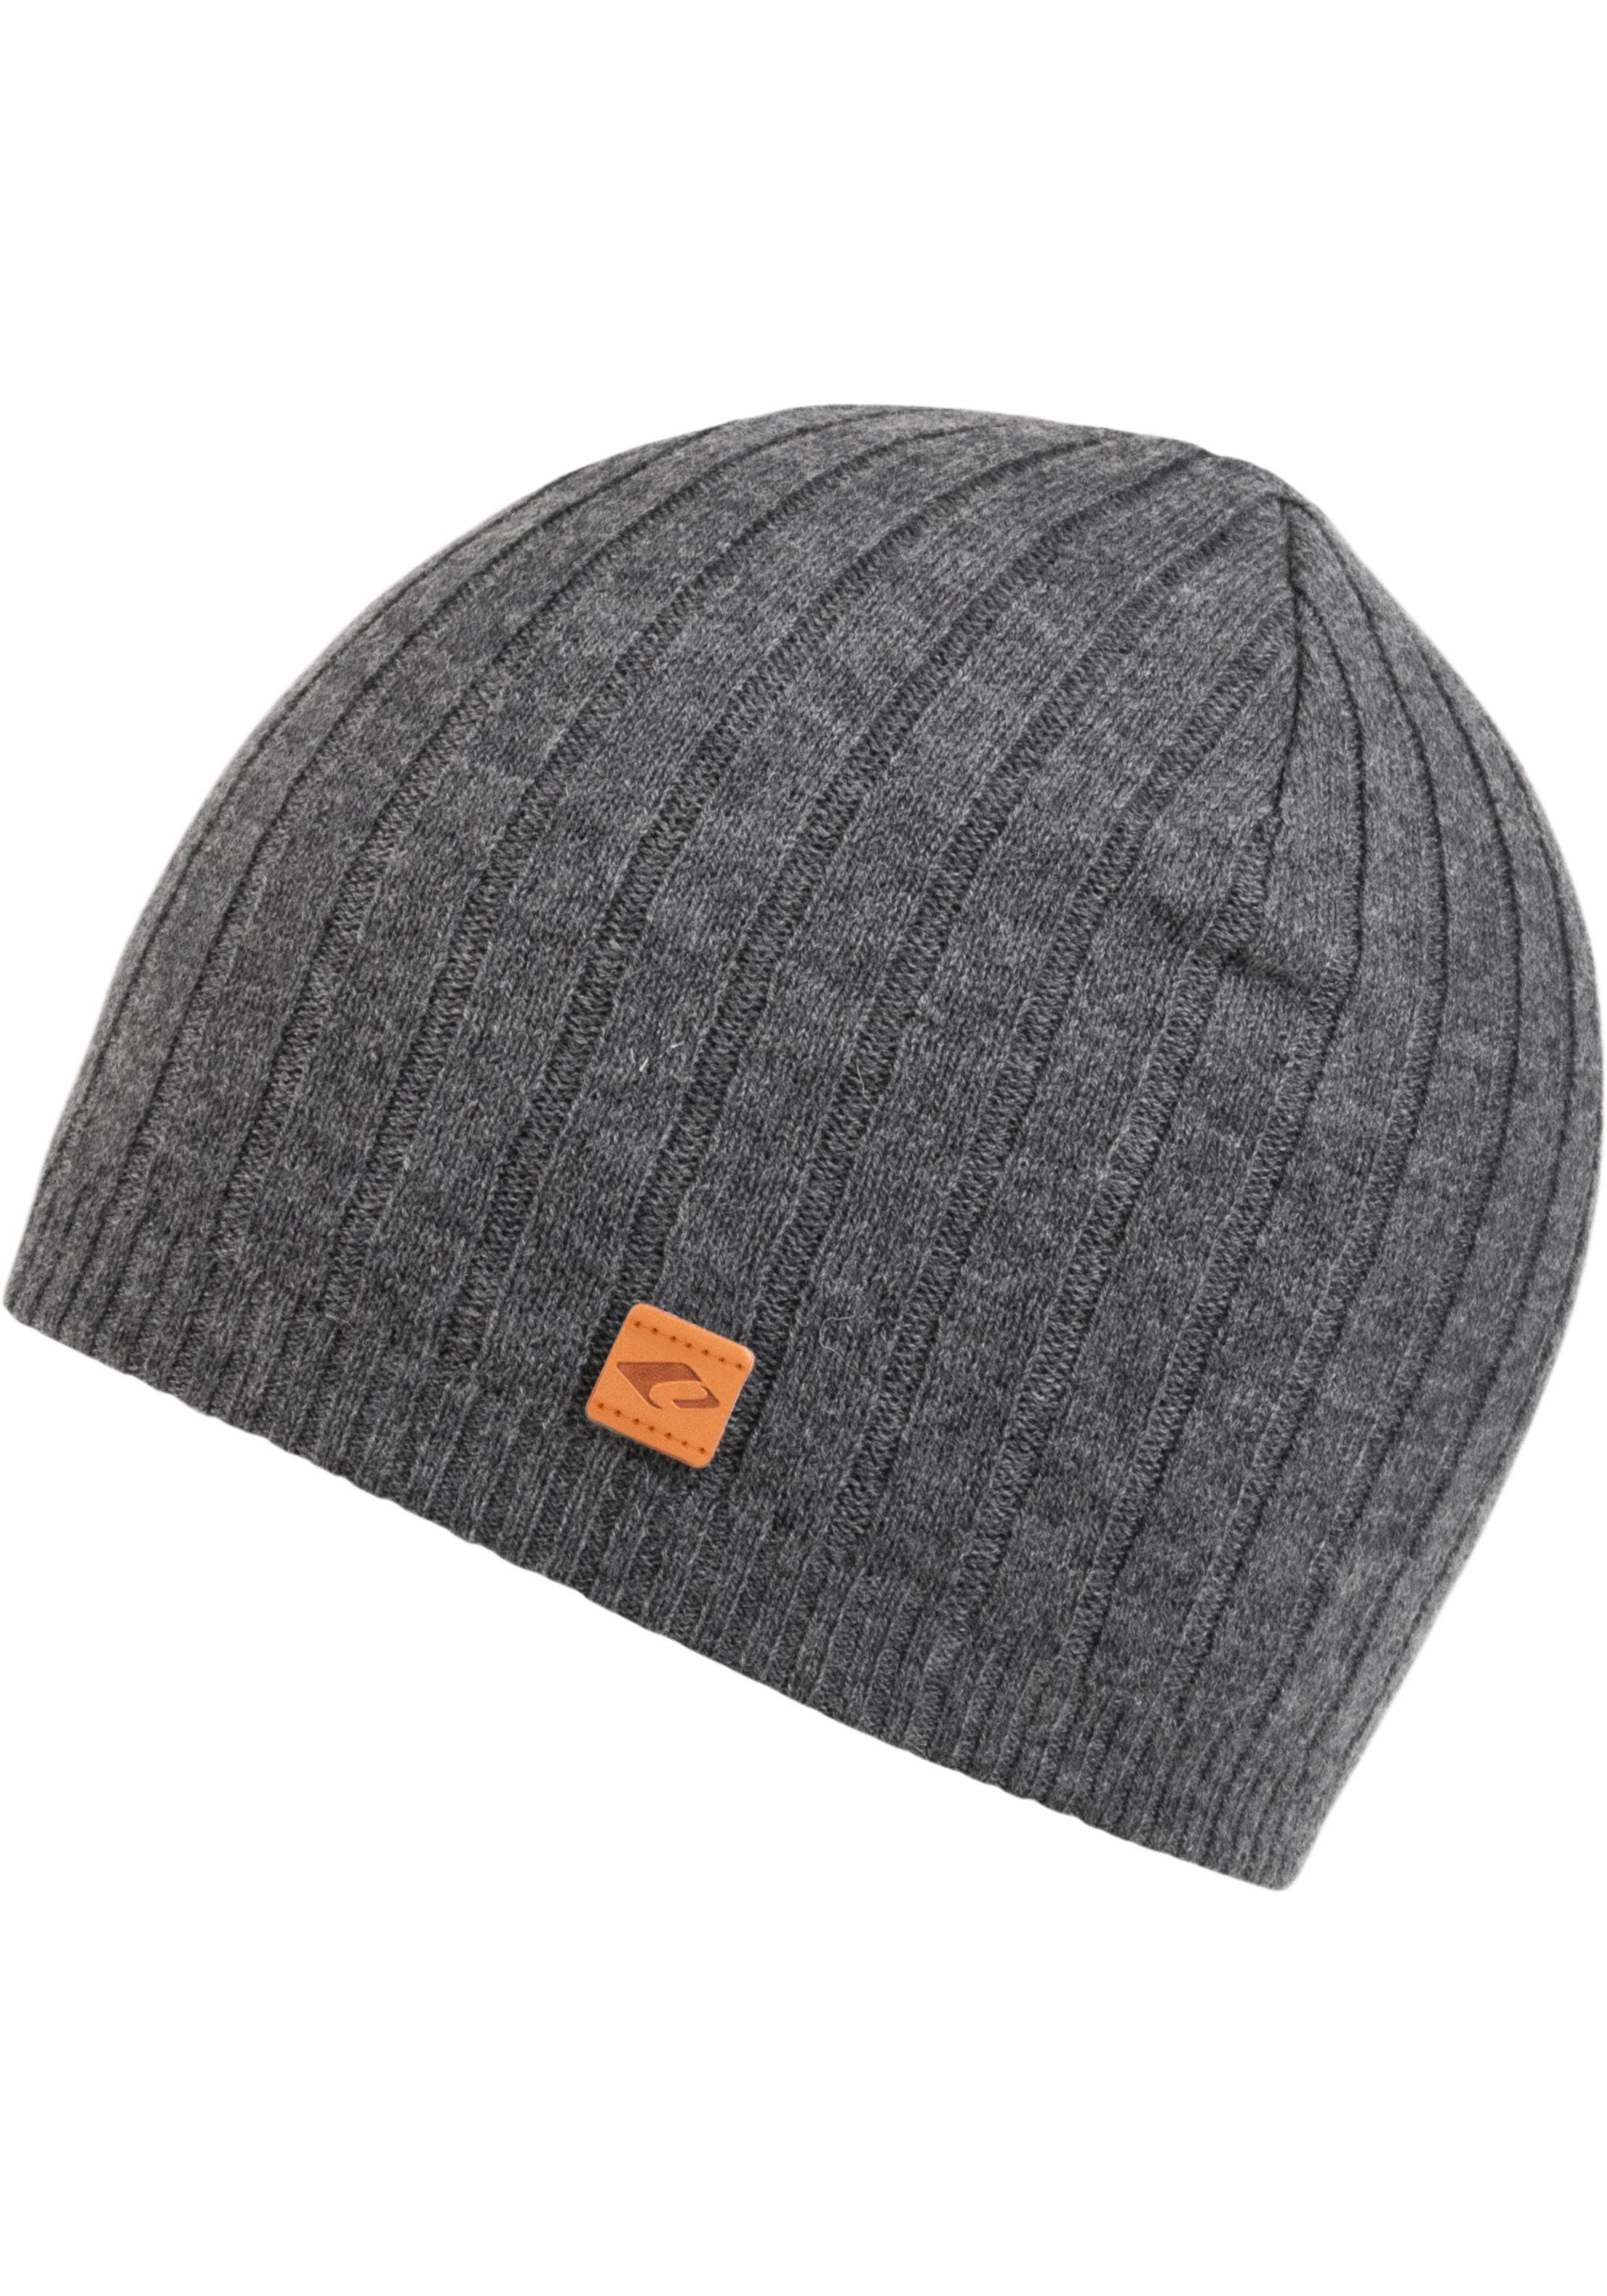 chillouts Beanie Alfred Hat Doppellagig, grey angenehm warm melange